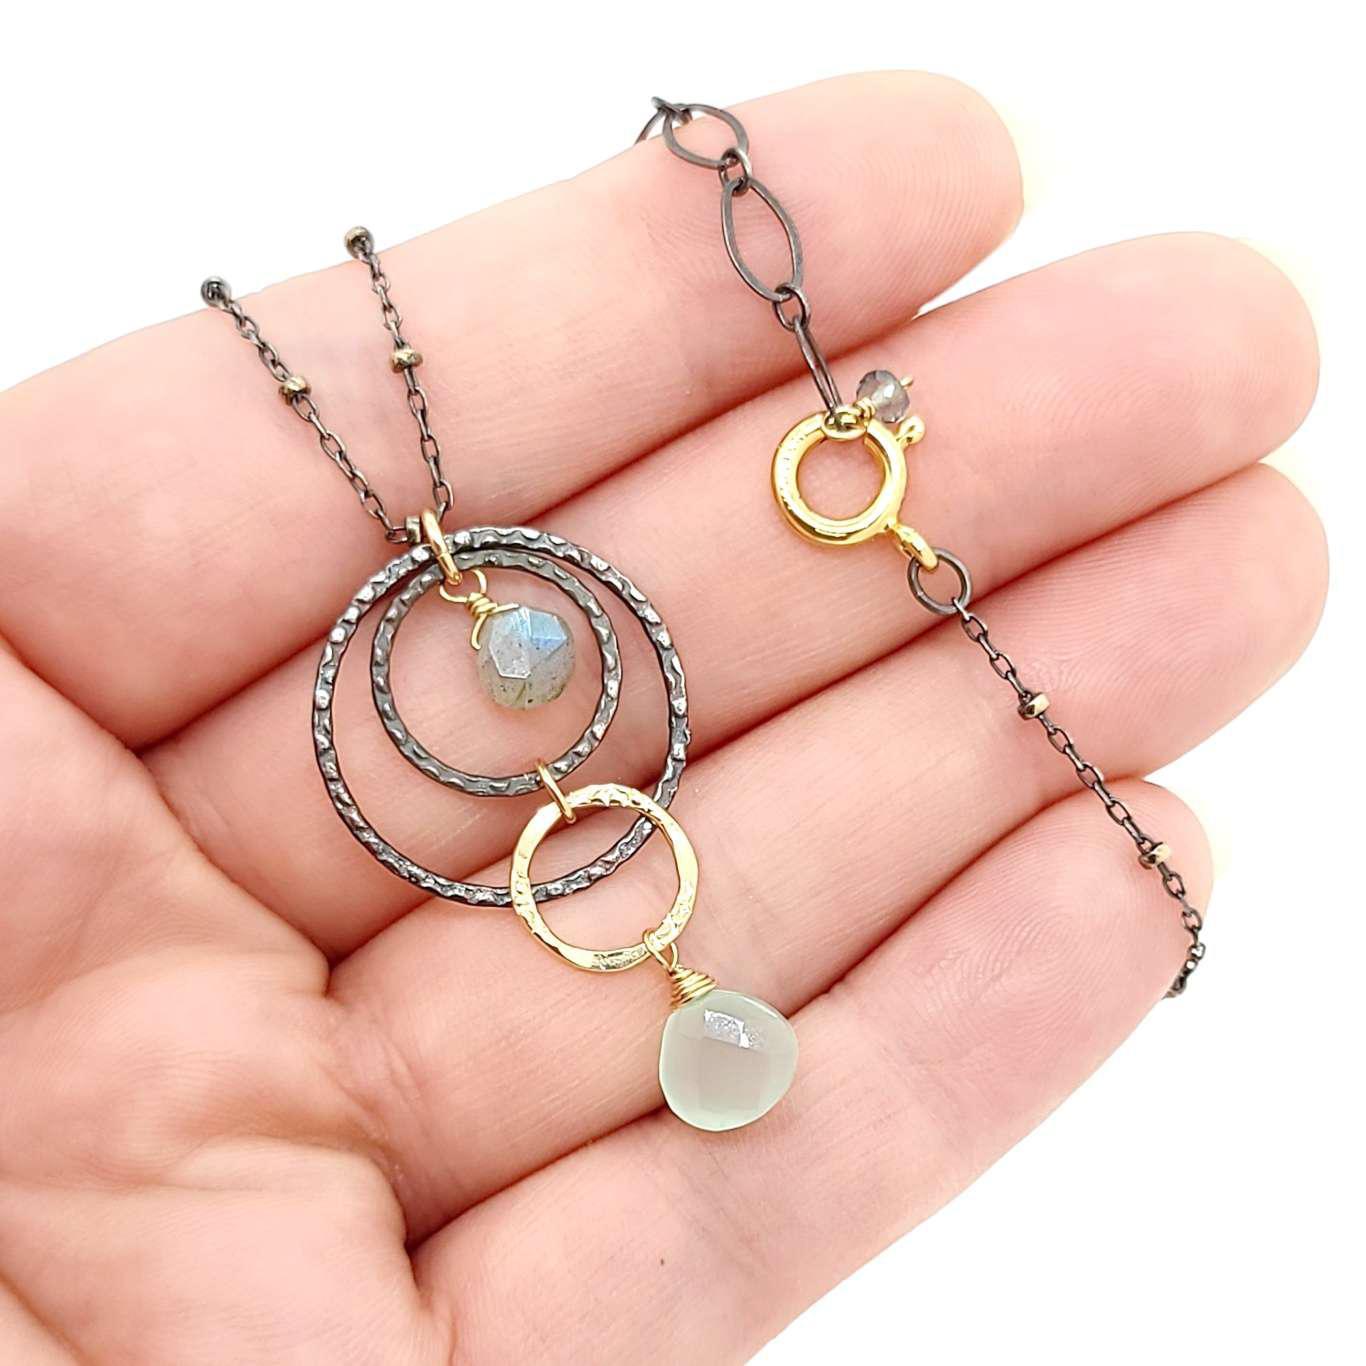 Necklace - Triple Circle Chalcedony and Labradorite Pendant by Calliope Jewelry